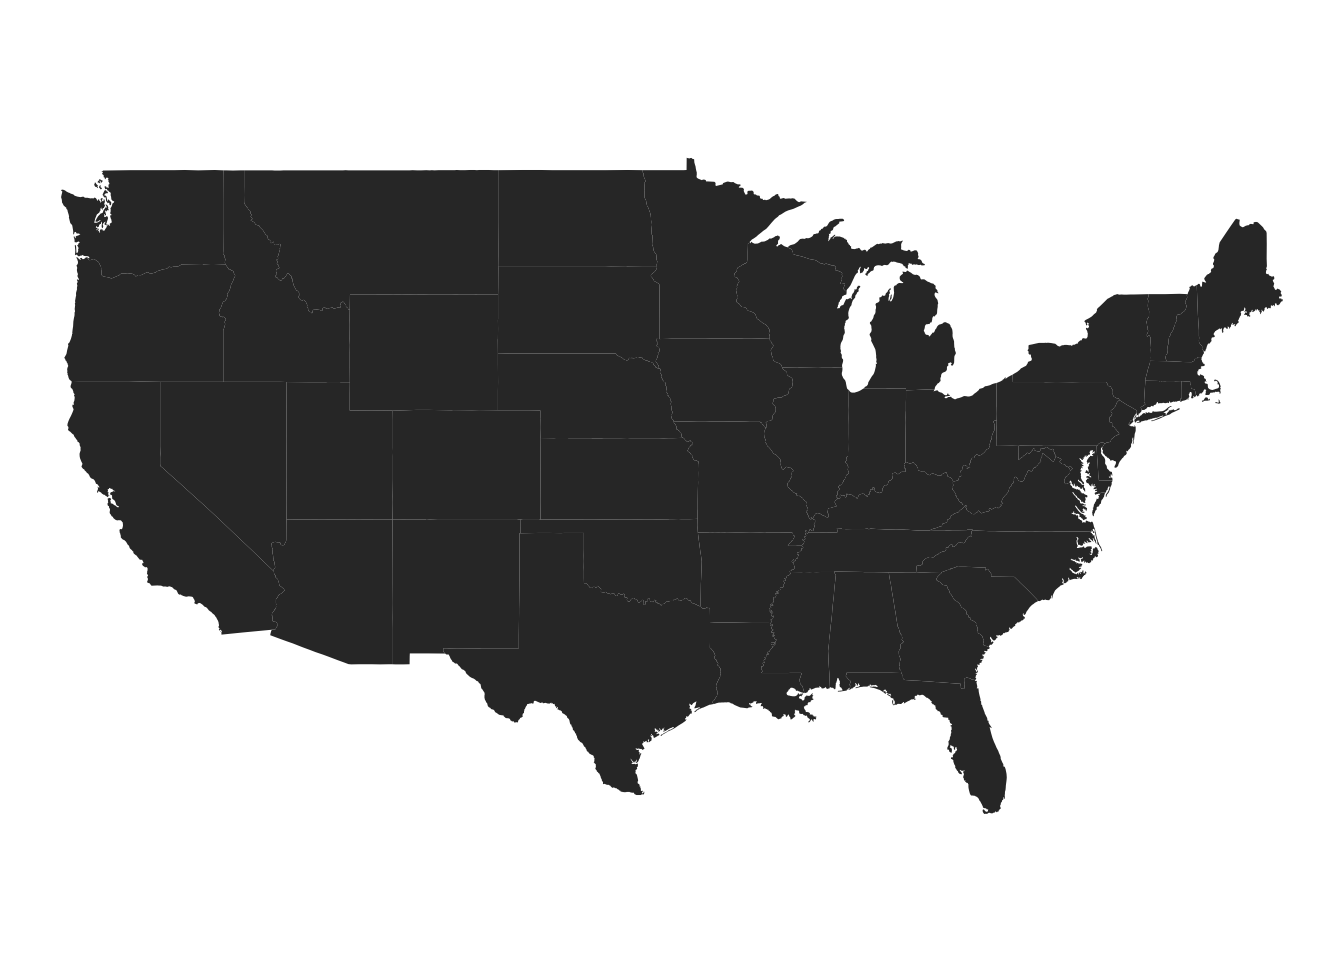 A map of the US with the state borders.